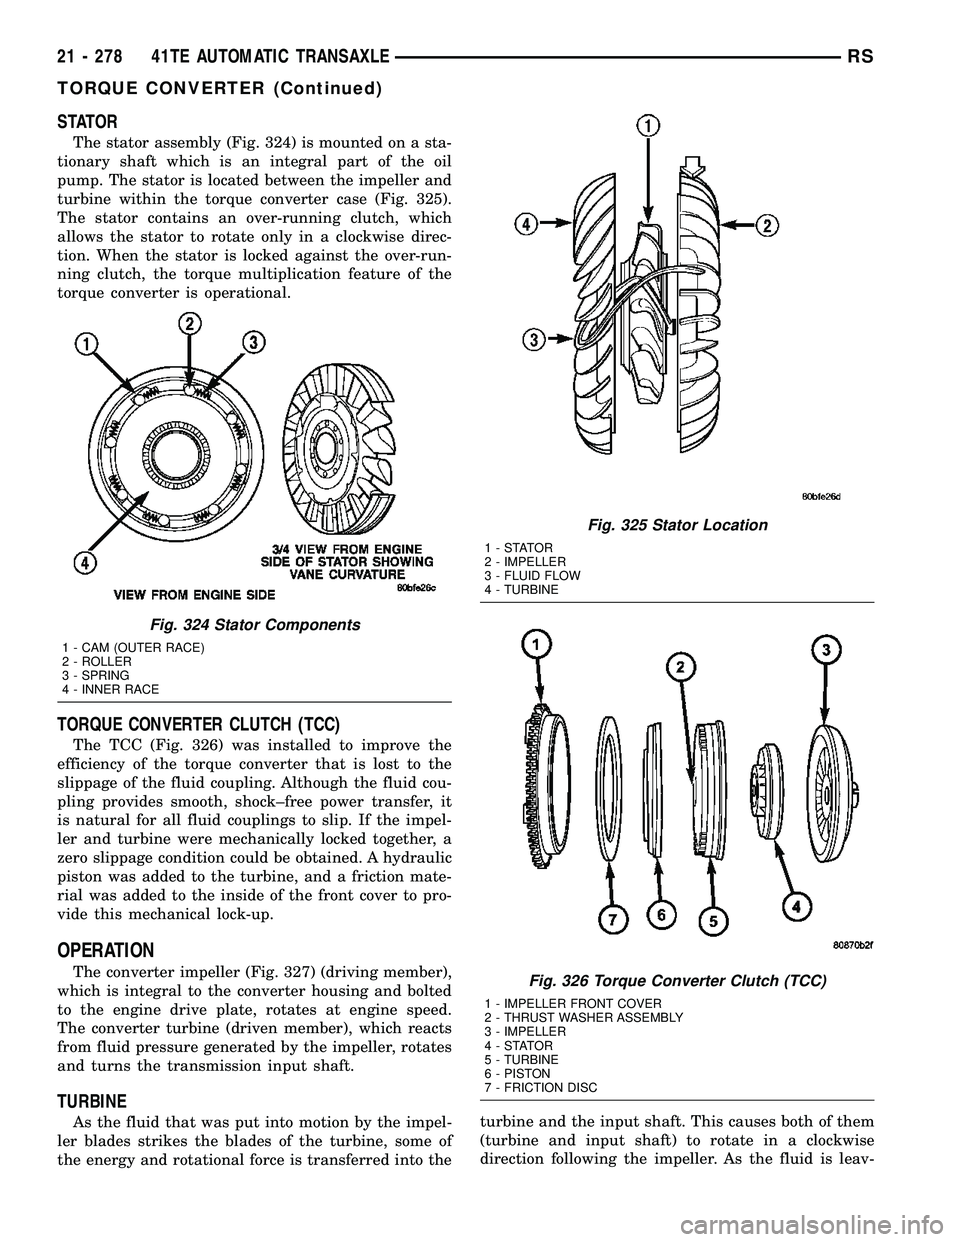 CHRYSLER VOYAGER 2005  Service Manual STATOR
The stator assembly (Fig. 324) is mounted on a sta-
tionary shaft which is an integral part of the oil
pump. The stator is located between the impeller and
turbine within the torque converter c